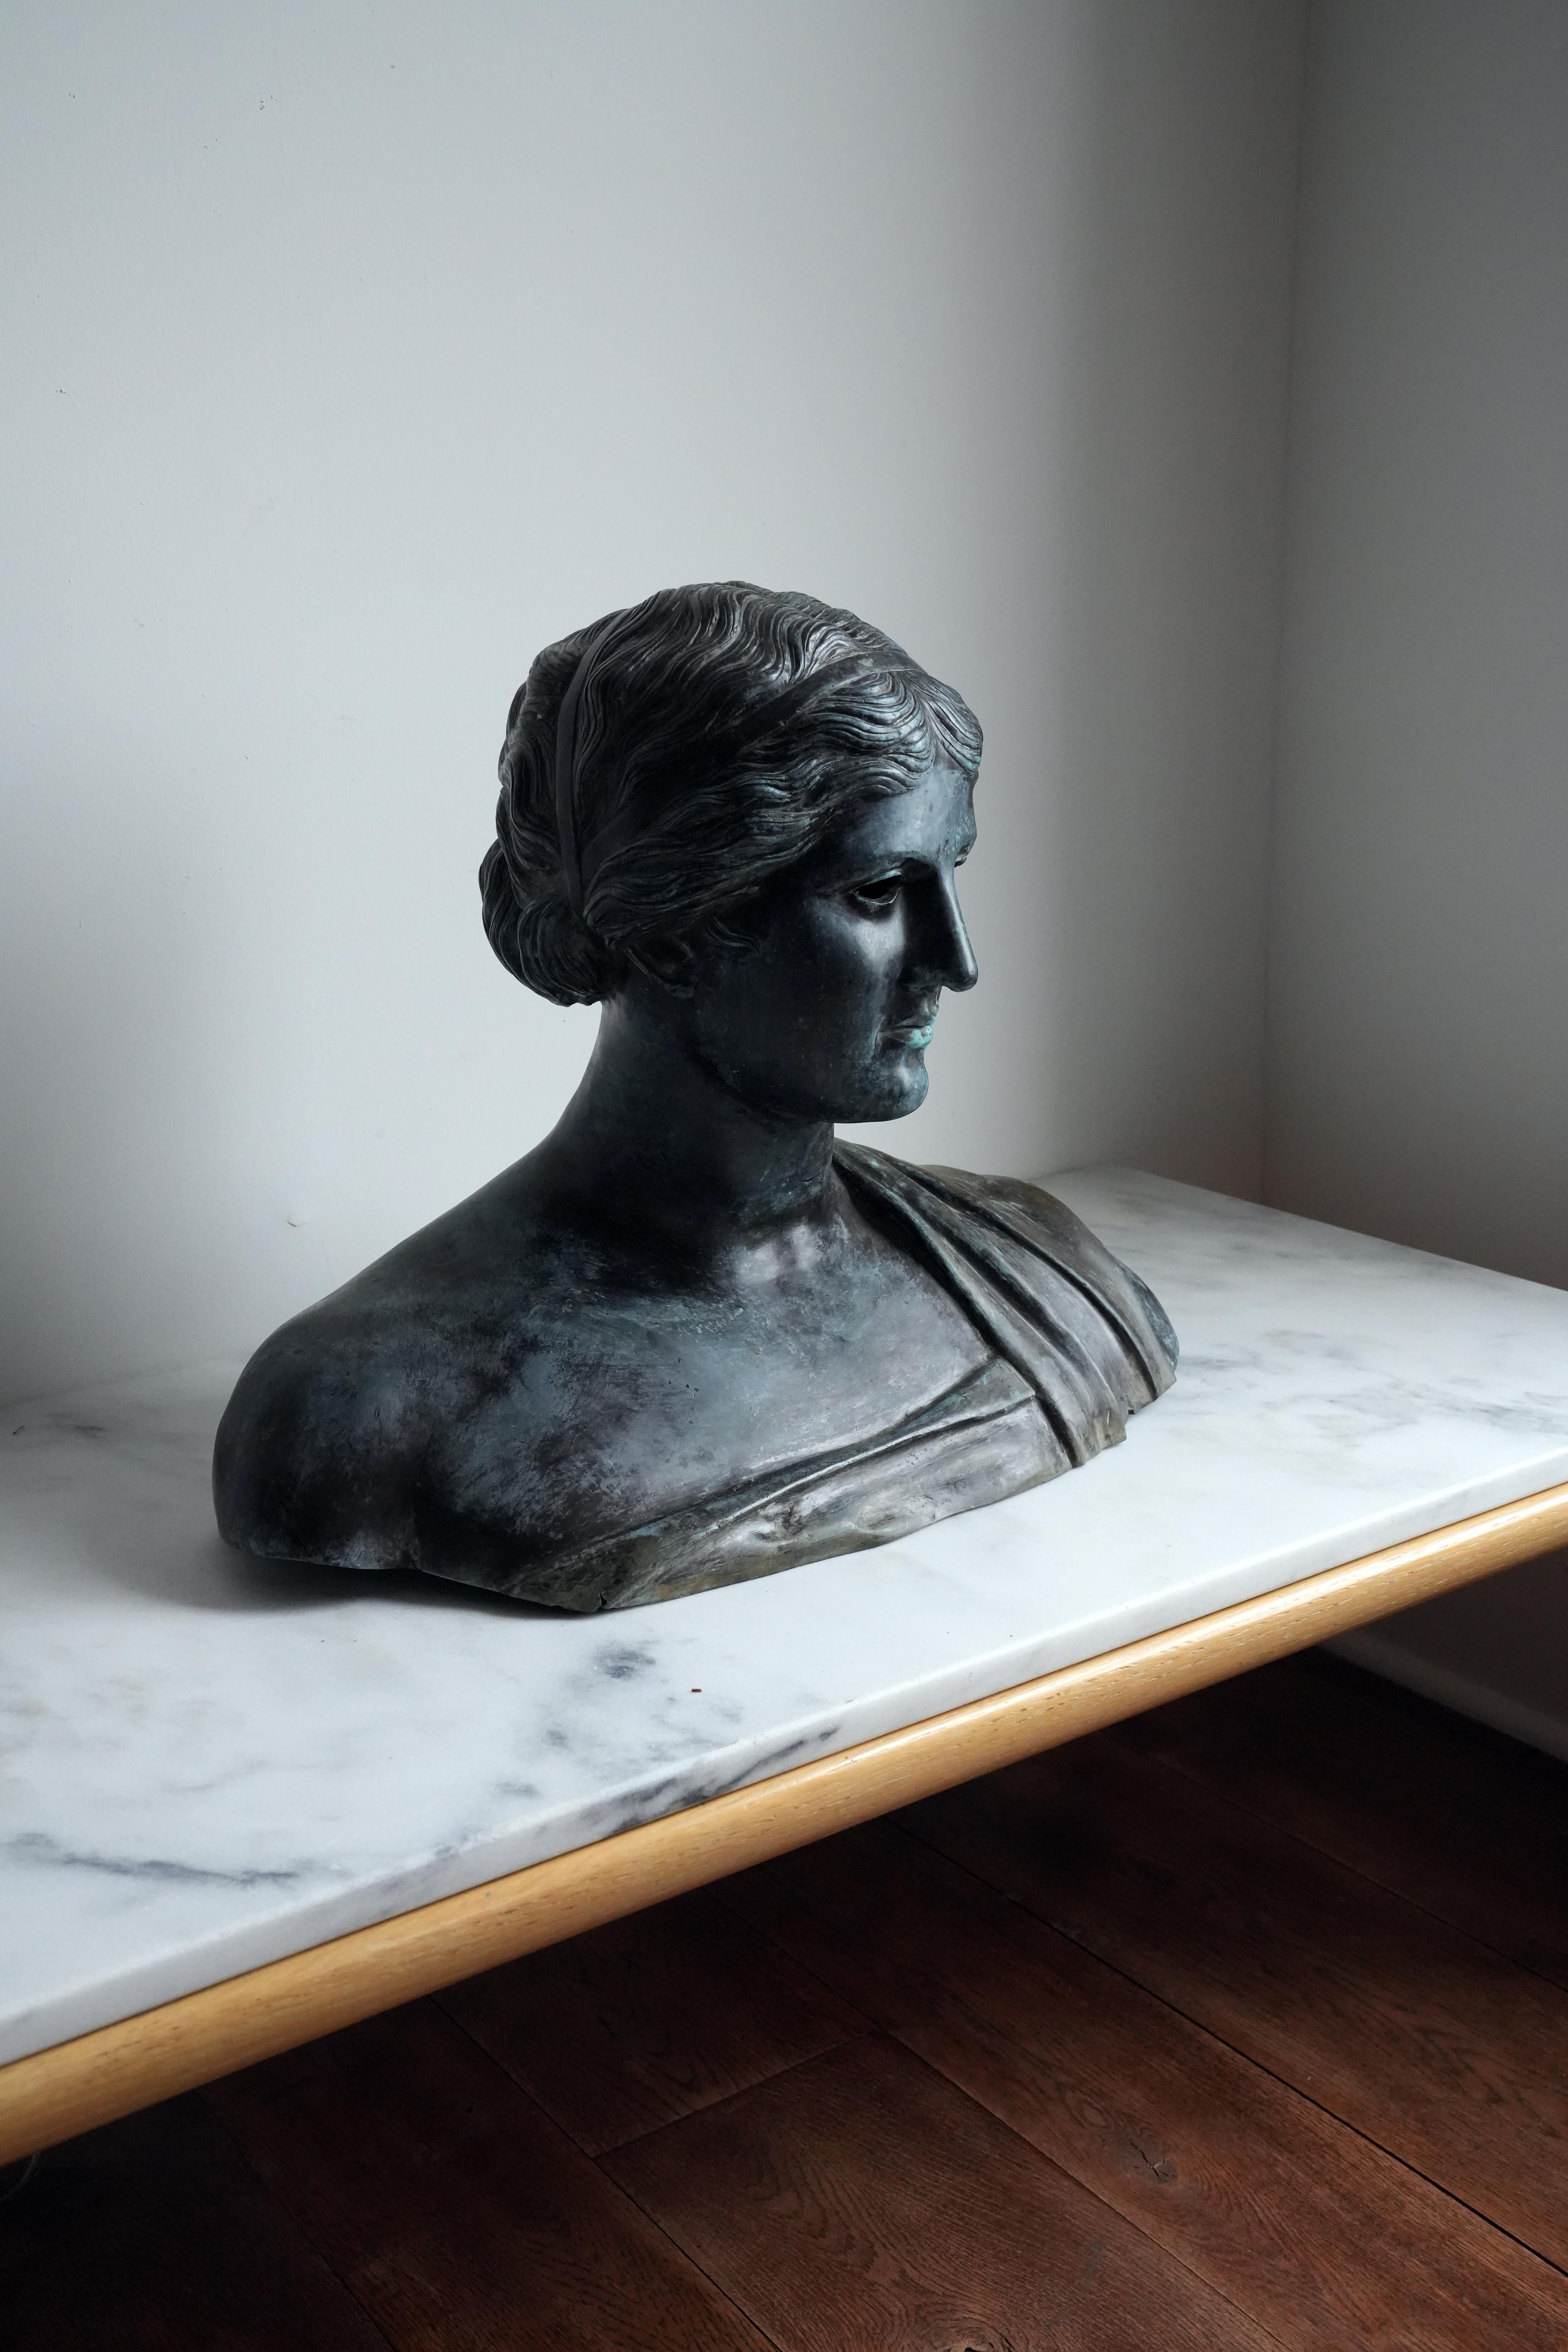 Grand tour bronze bust of a woman.
Beautifully cast and perfectly patinated. Dates around 1900.